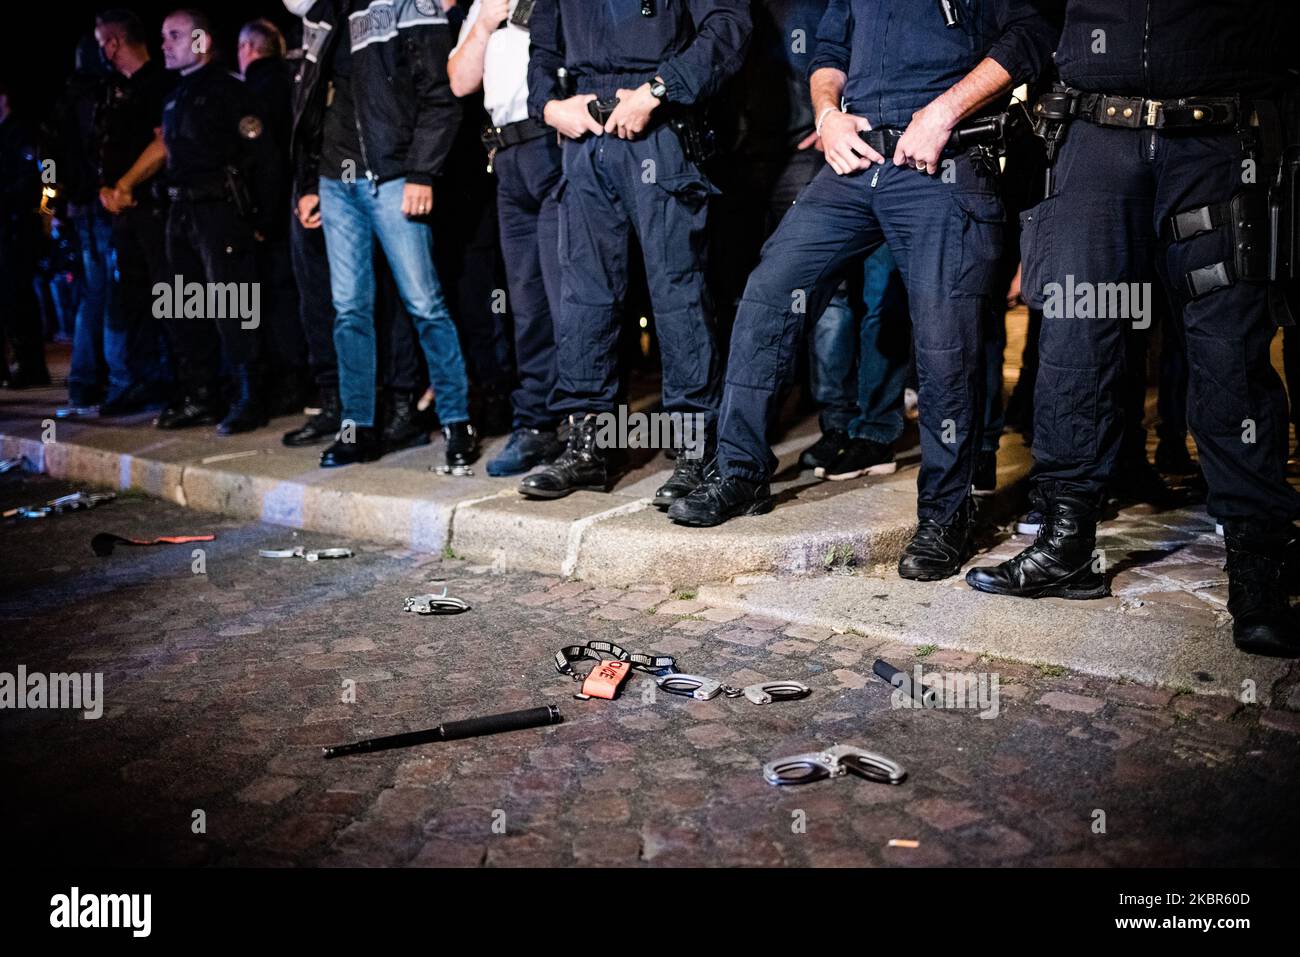 On 13 June 2020, several dozen police officers gathered at the foot of the Arc de Triomphe in Paris for a symbolic action of throwing handcuffs to protest against the ban on the strangulation key technique decreed by Christophe Castaner, Minister of the Interior, following accusations of police violence and racism in the police force. This action comes in a climate of police mistrust following the Black Lives Matter movement and the death of George Floyd in the USA. (Photo by Samuel Boivin/NurPhoto) Stock Photo